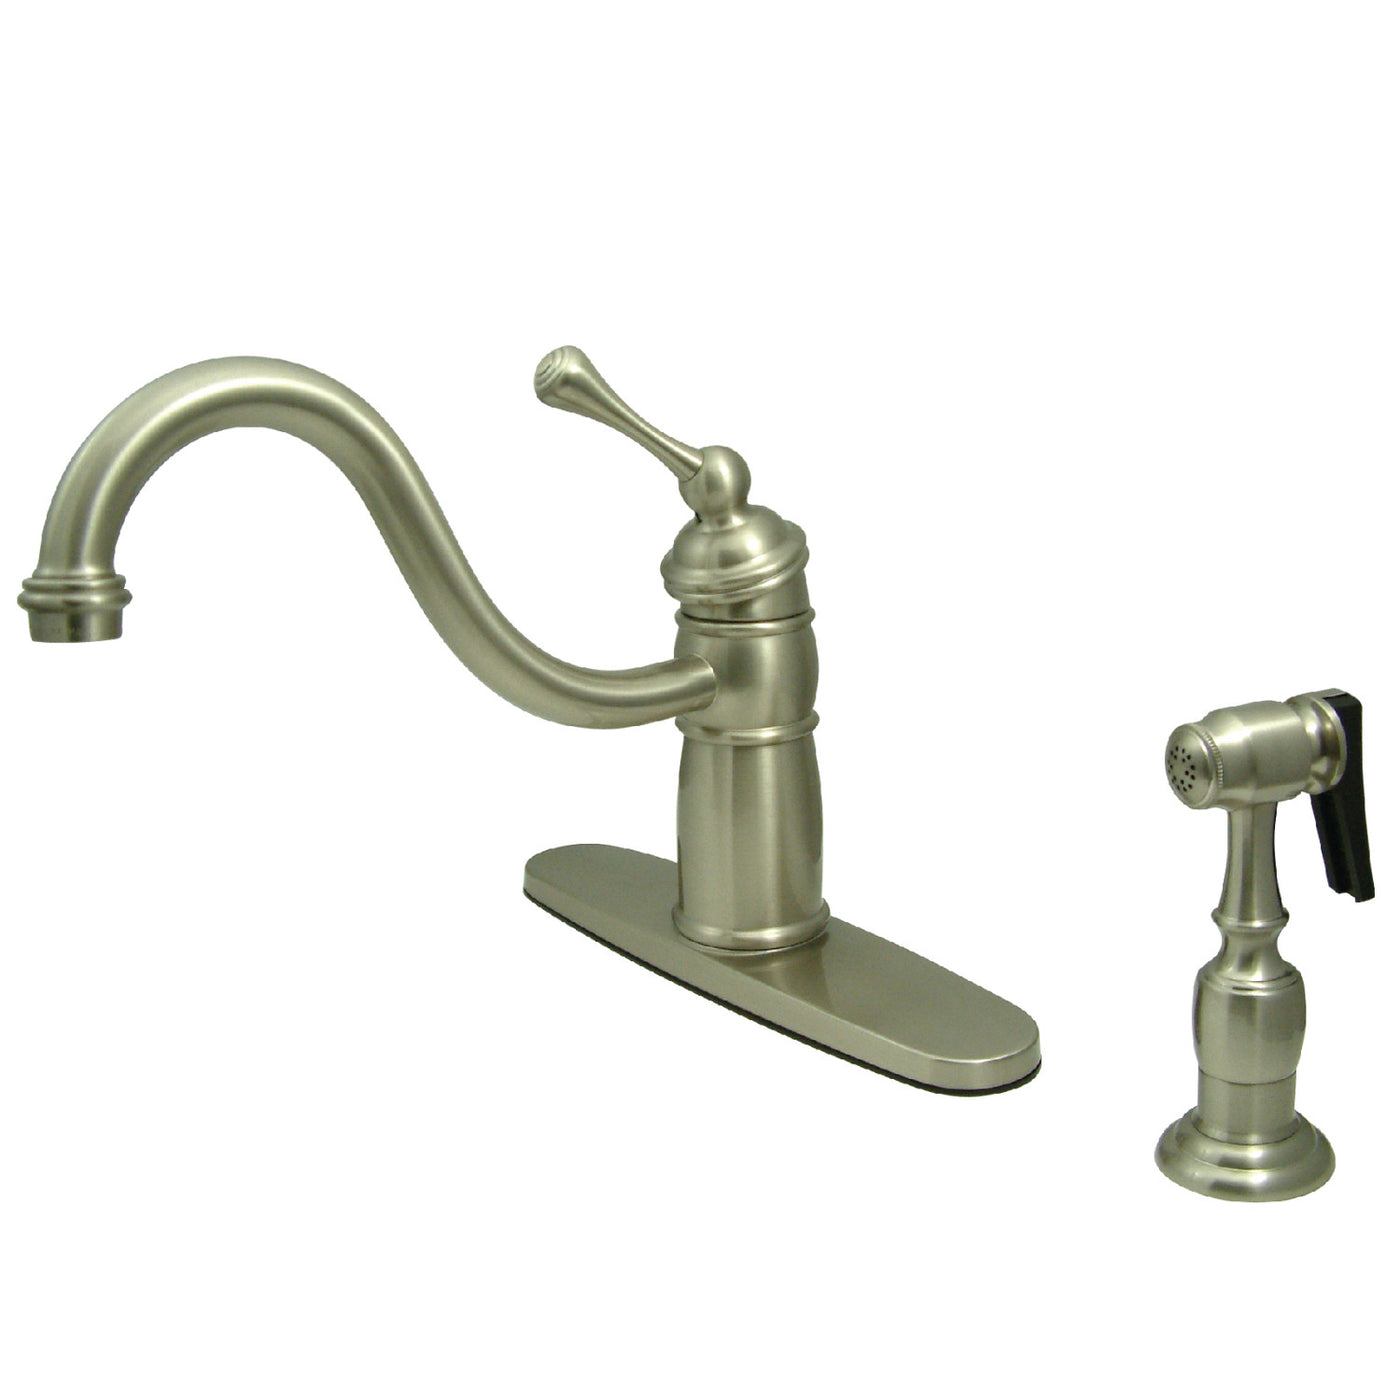 Elements of Design EB1578BLBS Single-Handle Kitchen Faucet with Brass Sprayer, Brushed Nickel